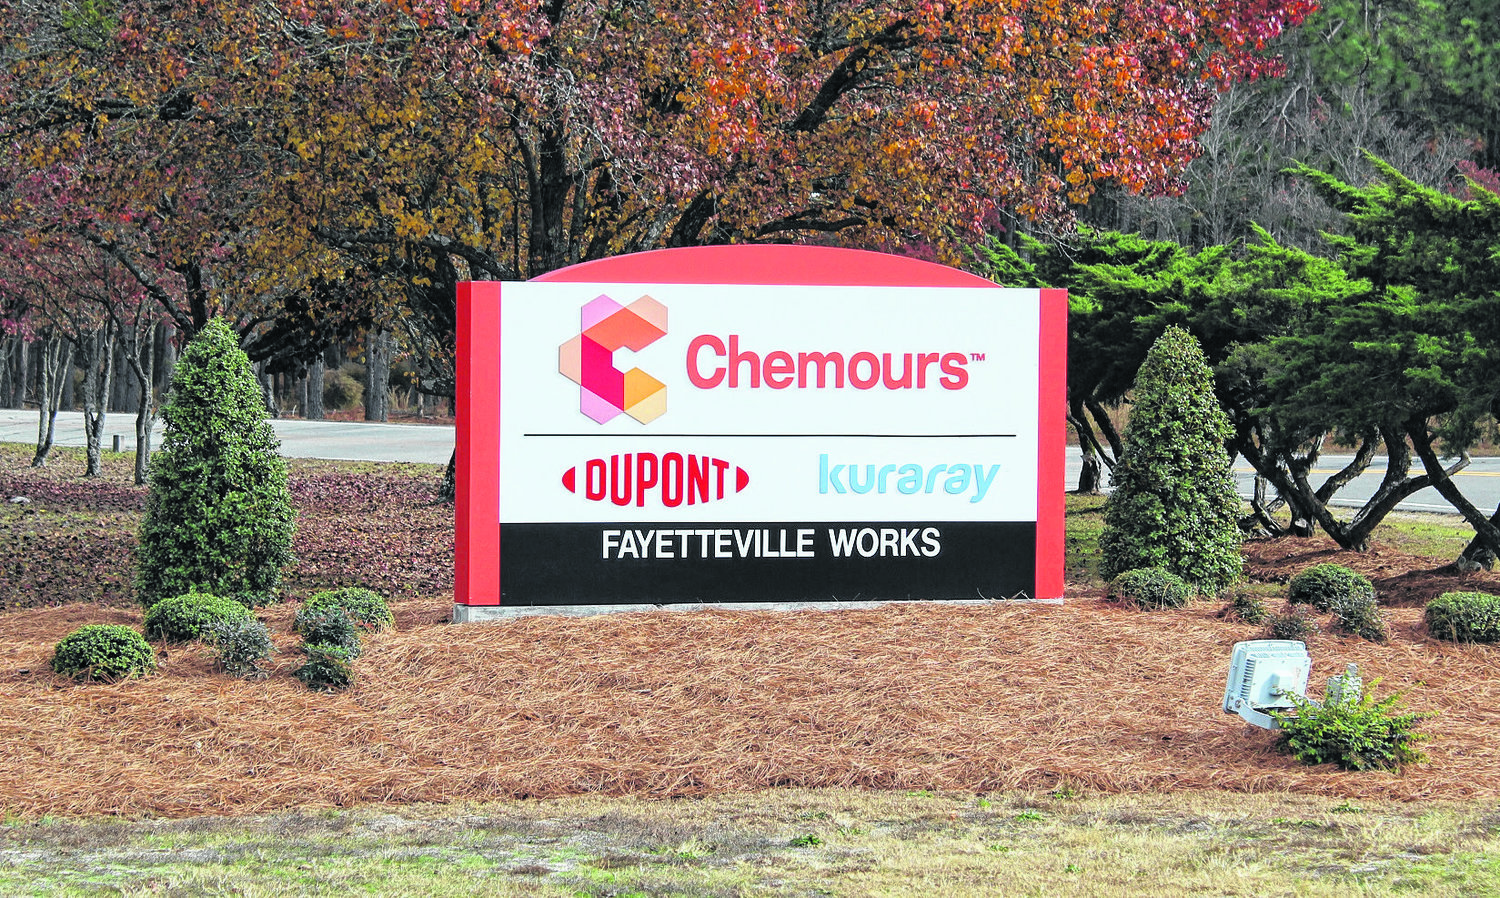 Cumberland County has filed a lawsuit against the Chemours and DuPont chemical companies, saying they caused severe groundwater contamination in the county.